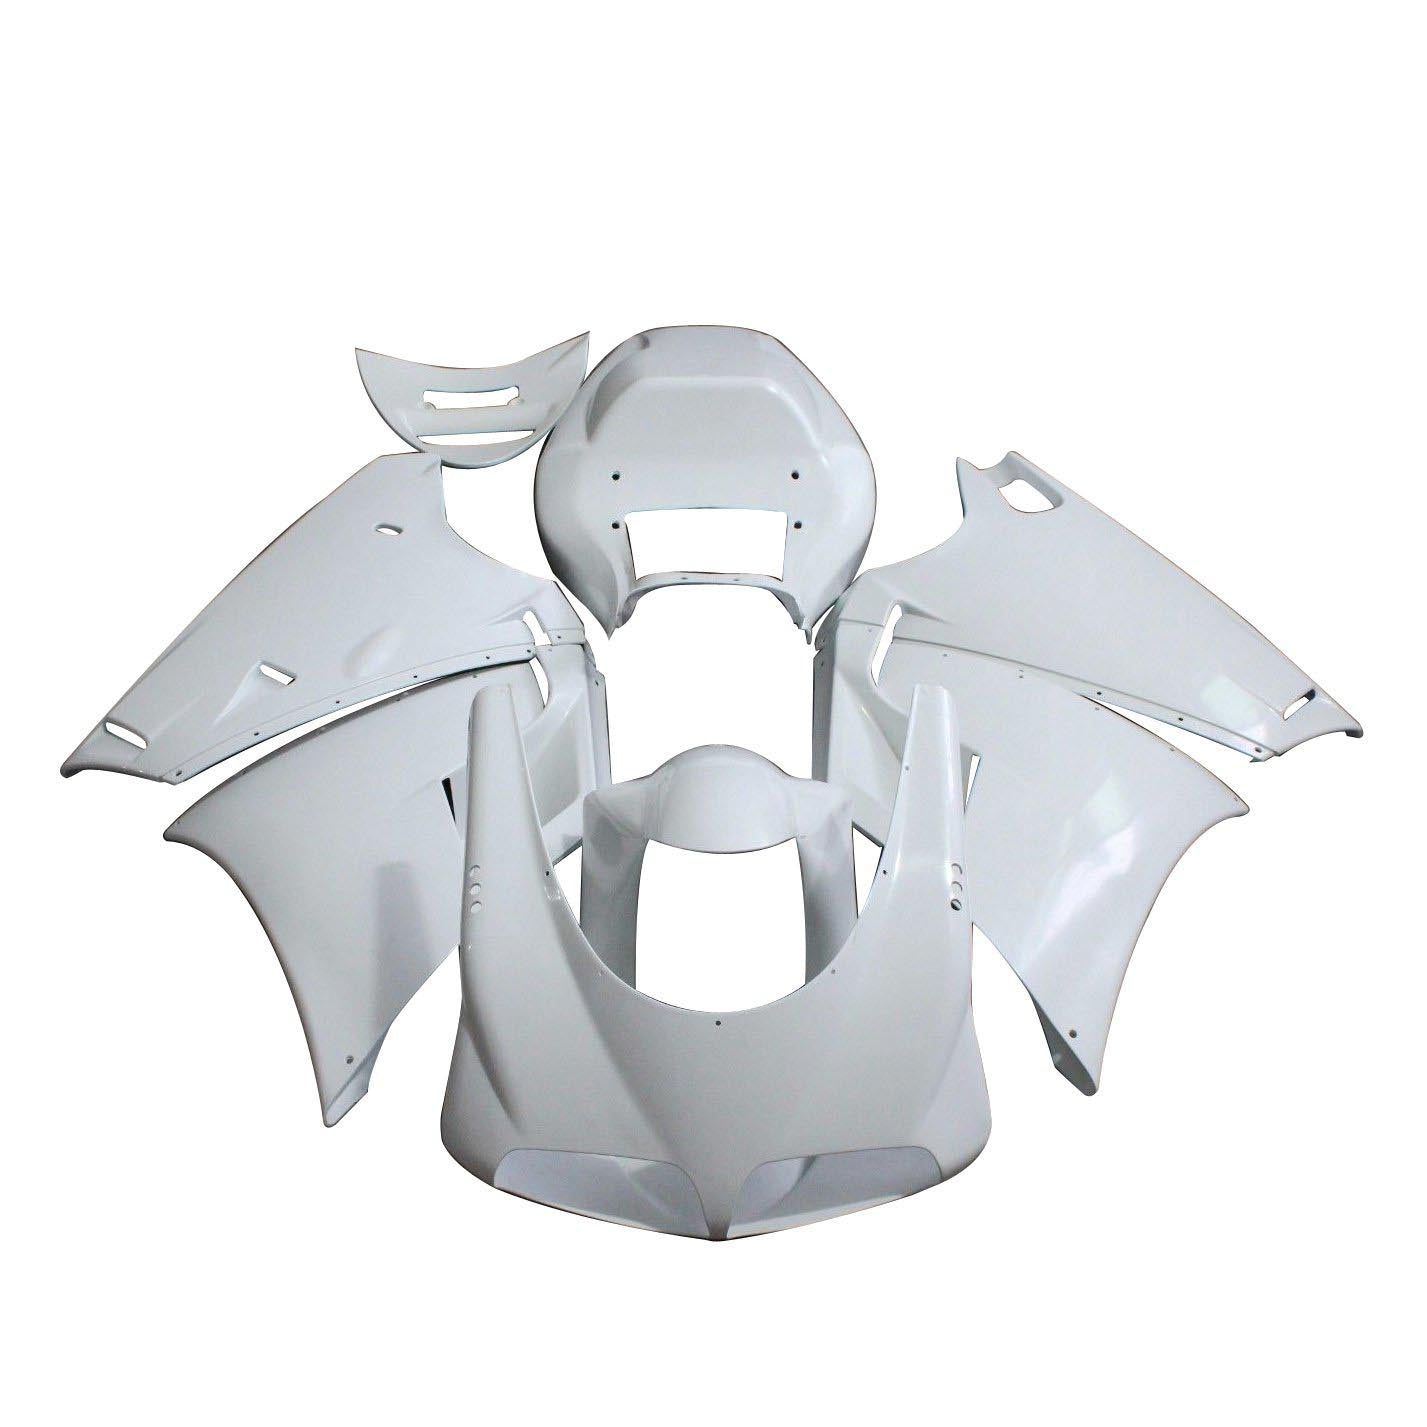 Bodywork Fairing ABS Injection Molding Unpainted for Ducati 996/748 1994-2002